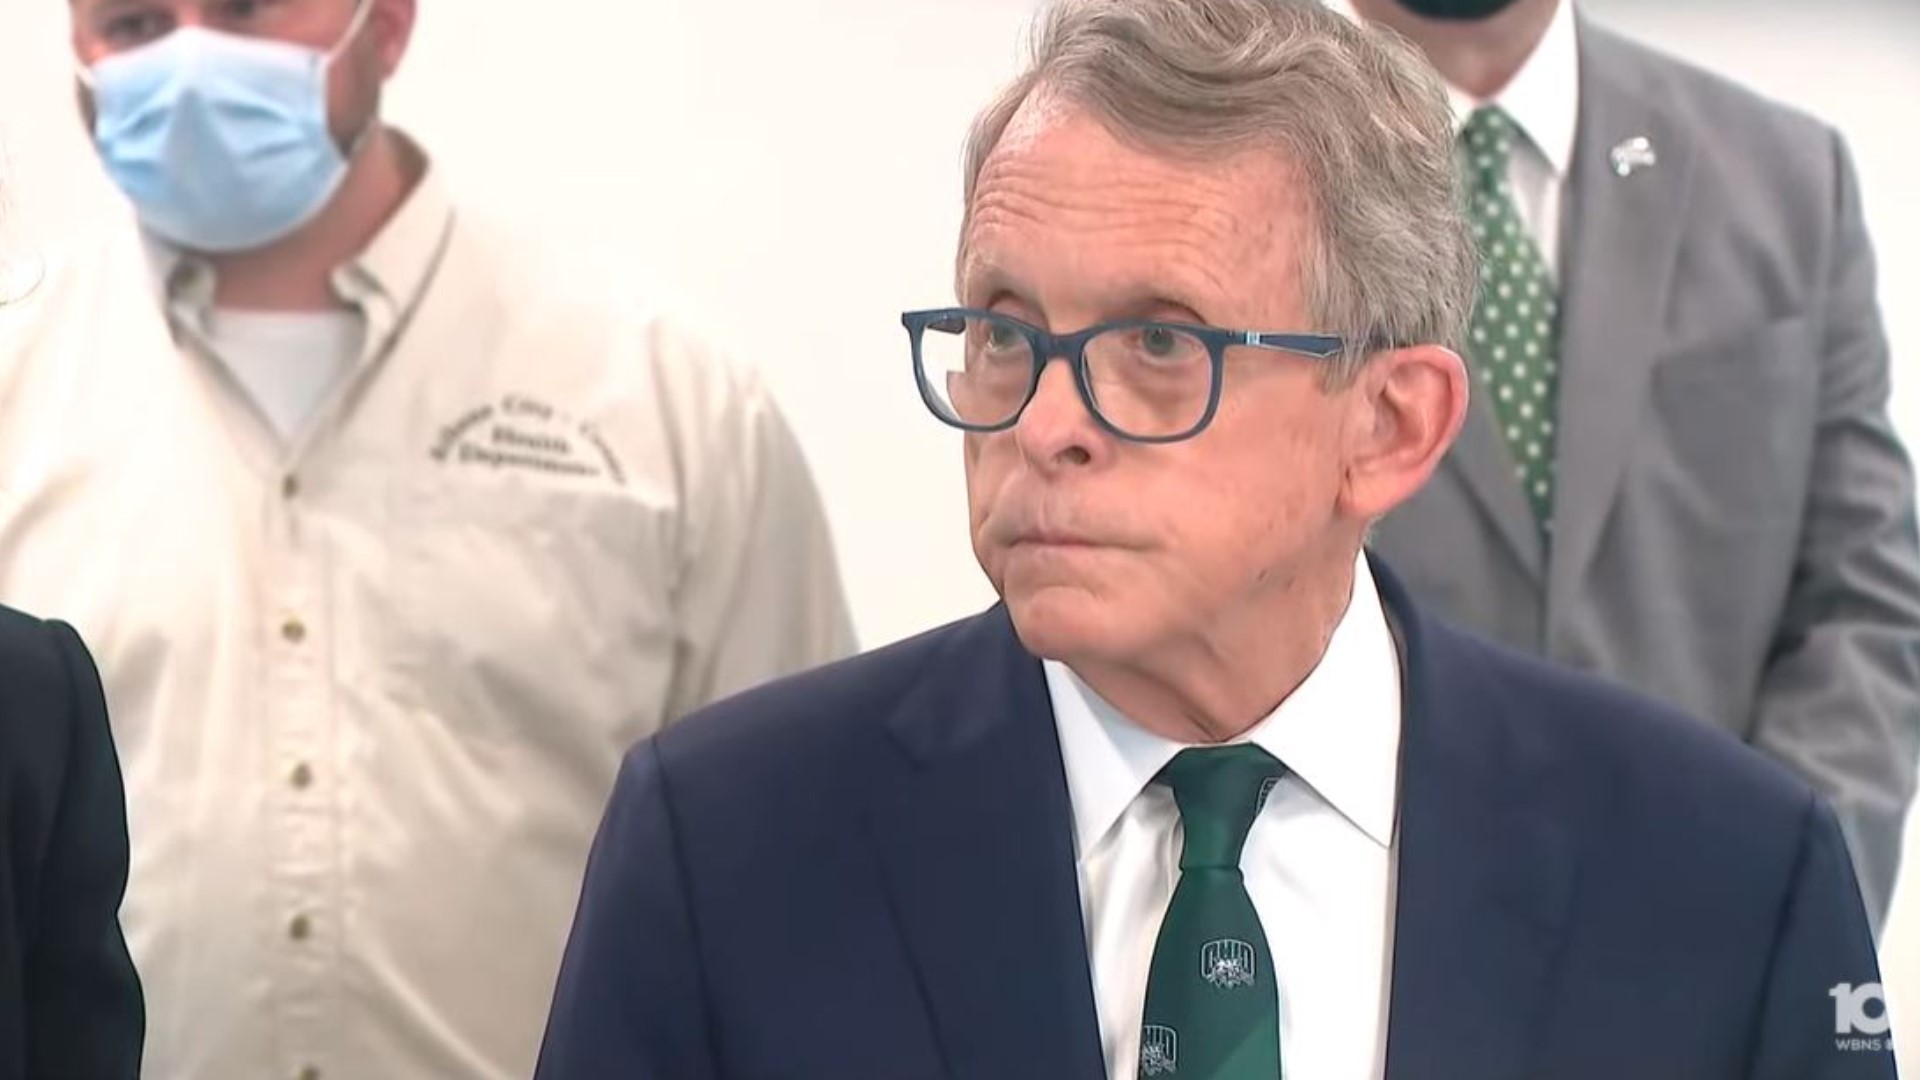 Gov. DeWine is encouraging college students across the state to roll up their sleeves and get vaccinated.